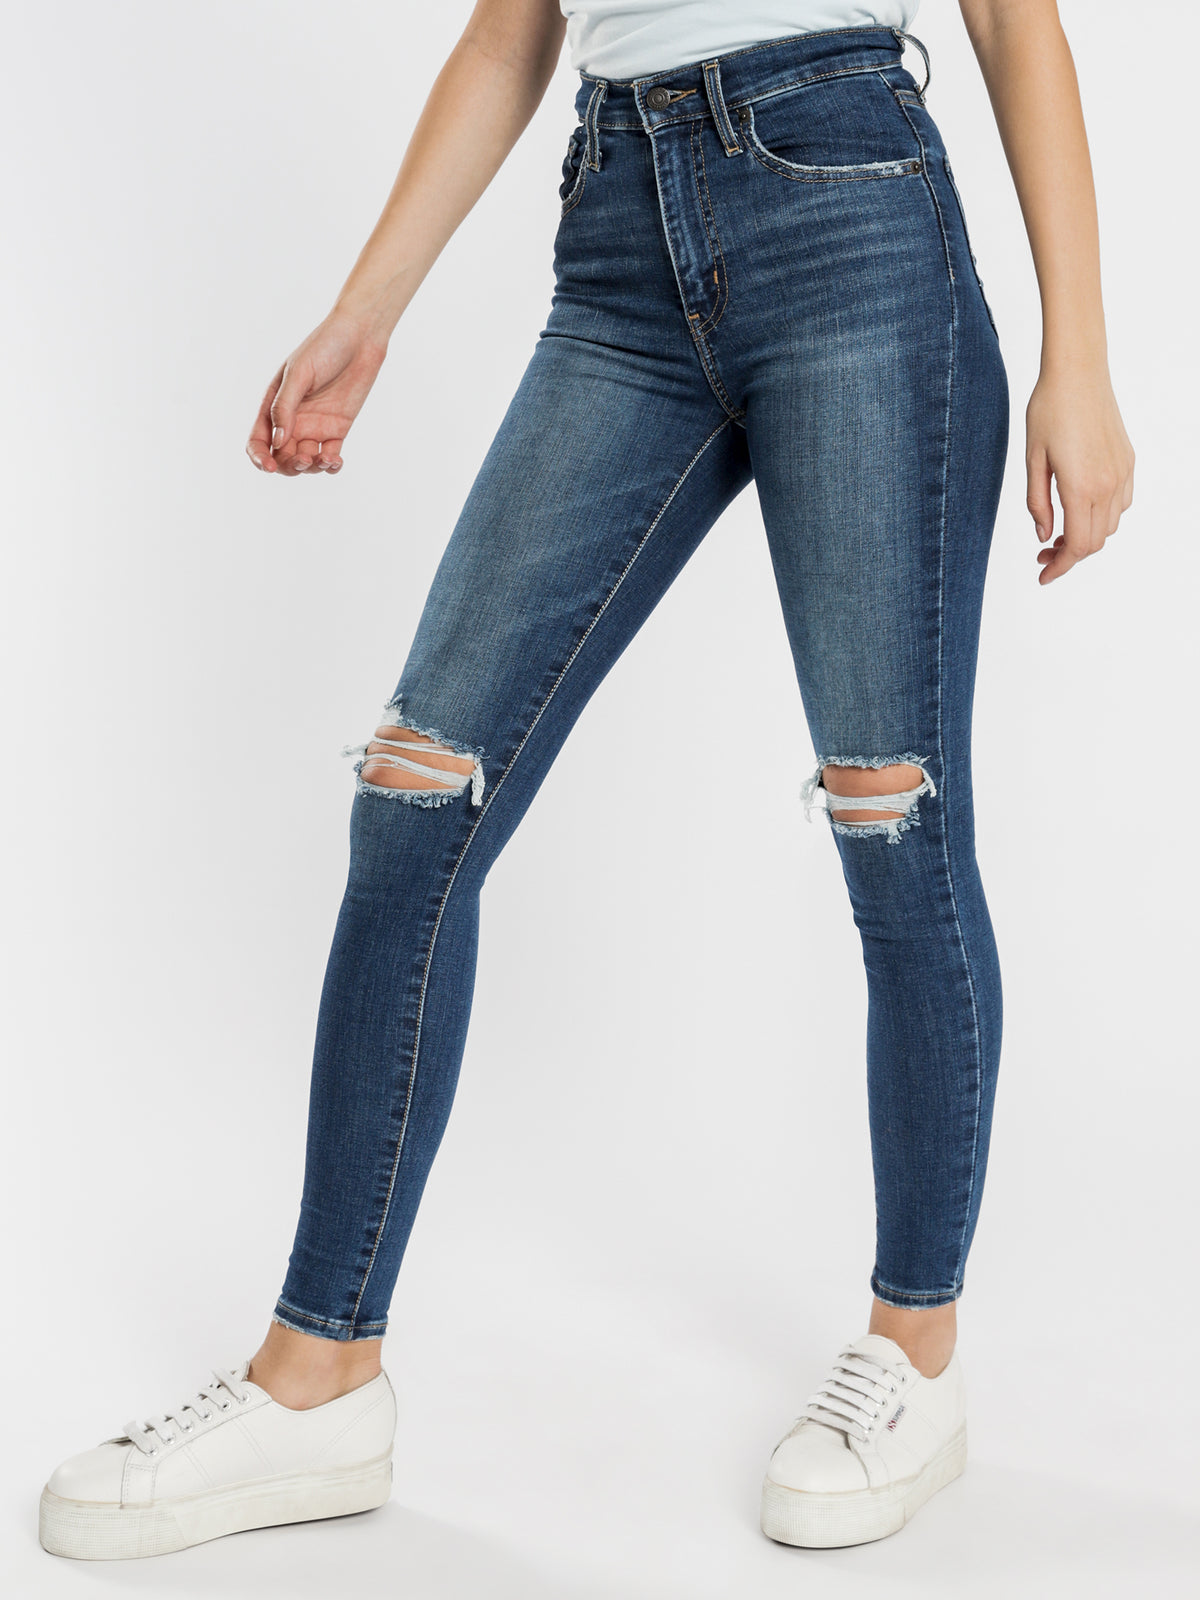 Mile High Super Skinny Jeans in Shady Business Blue Denim